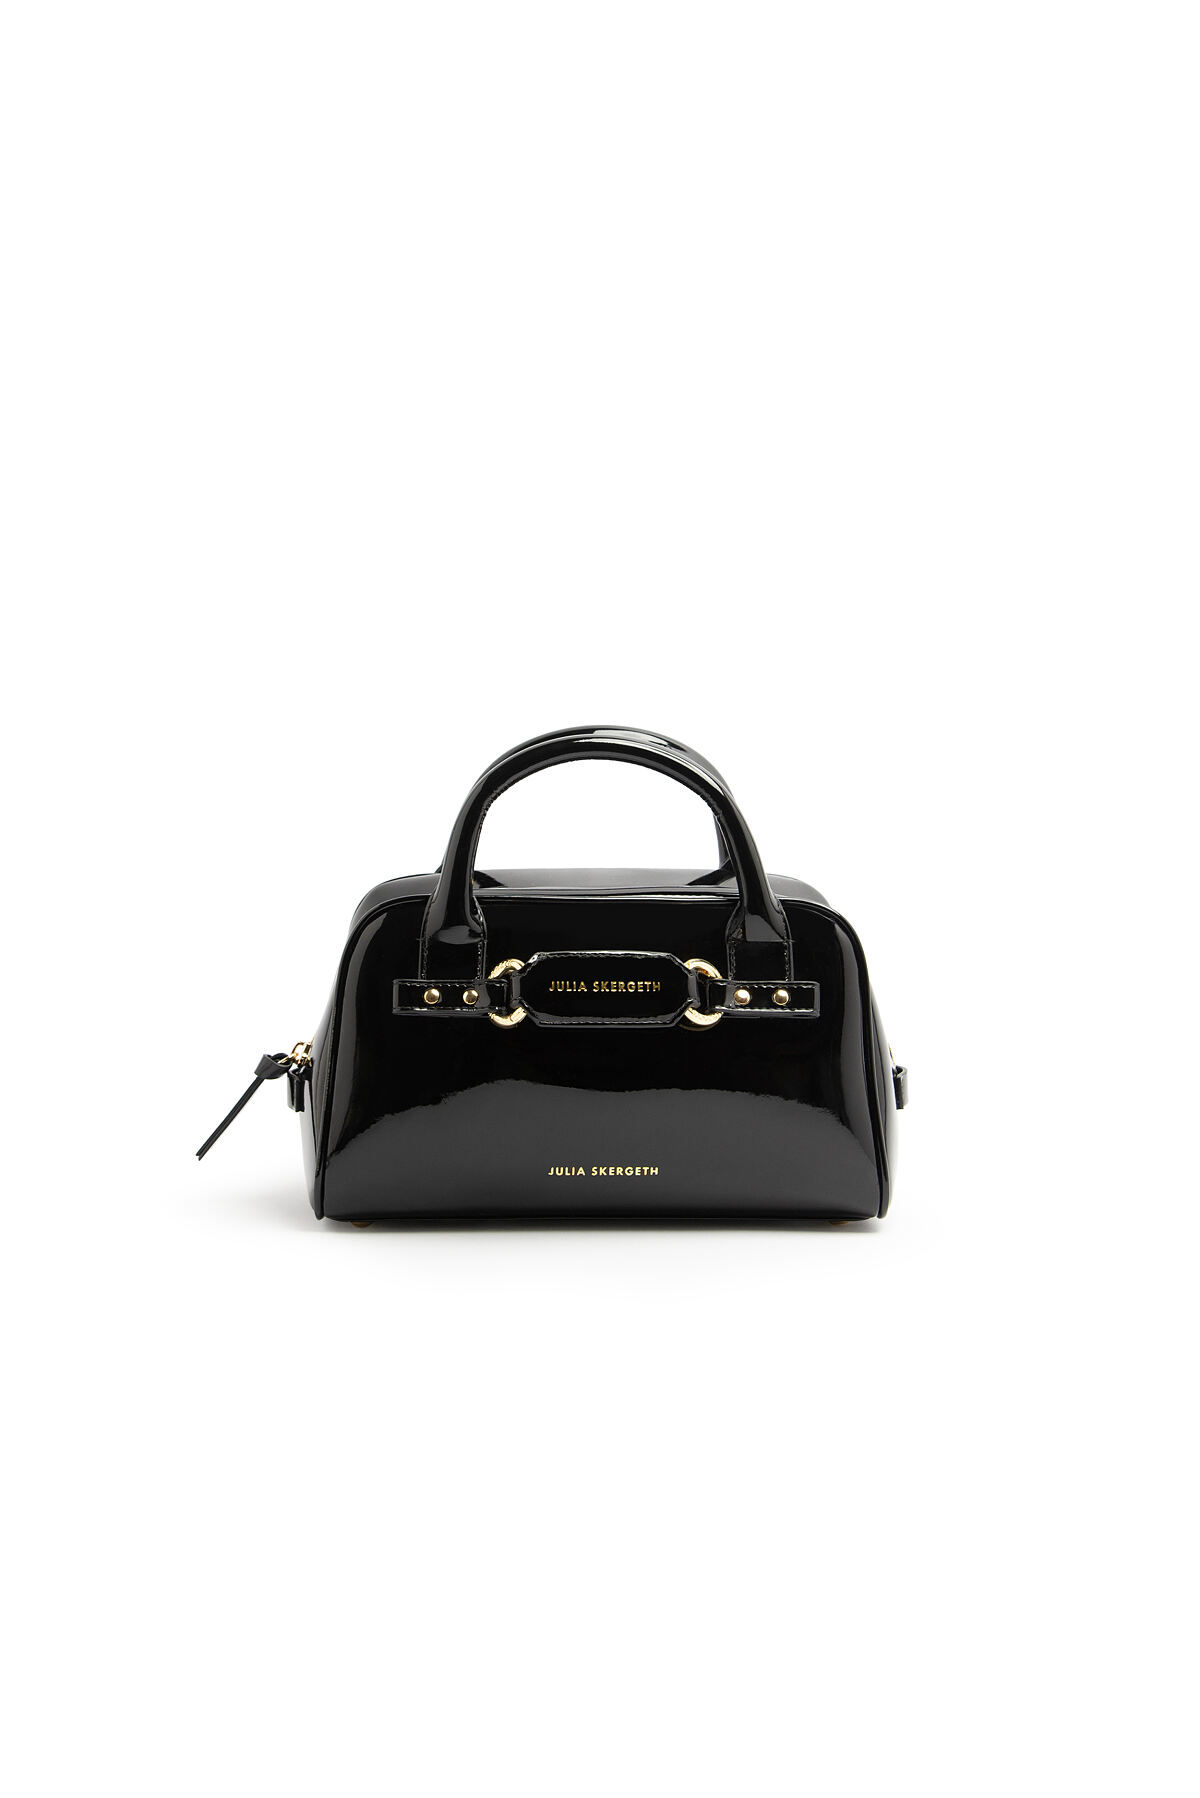 JULIA SKERGETH_Glossy Black_Doctors Bag Small_Gold and Silver Hardware_560,00 Euro